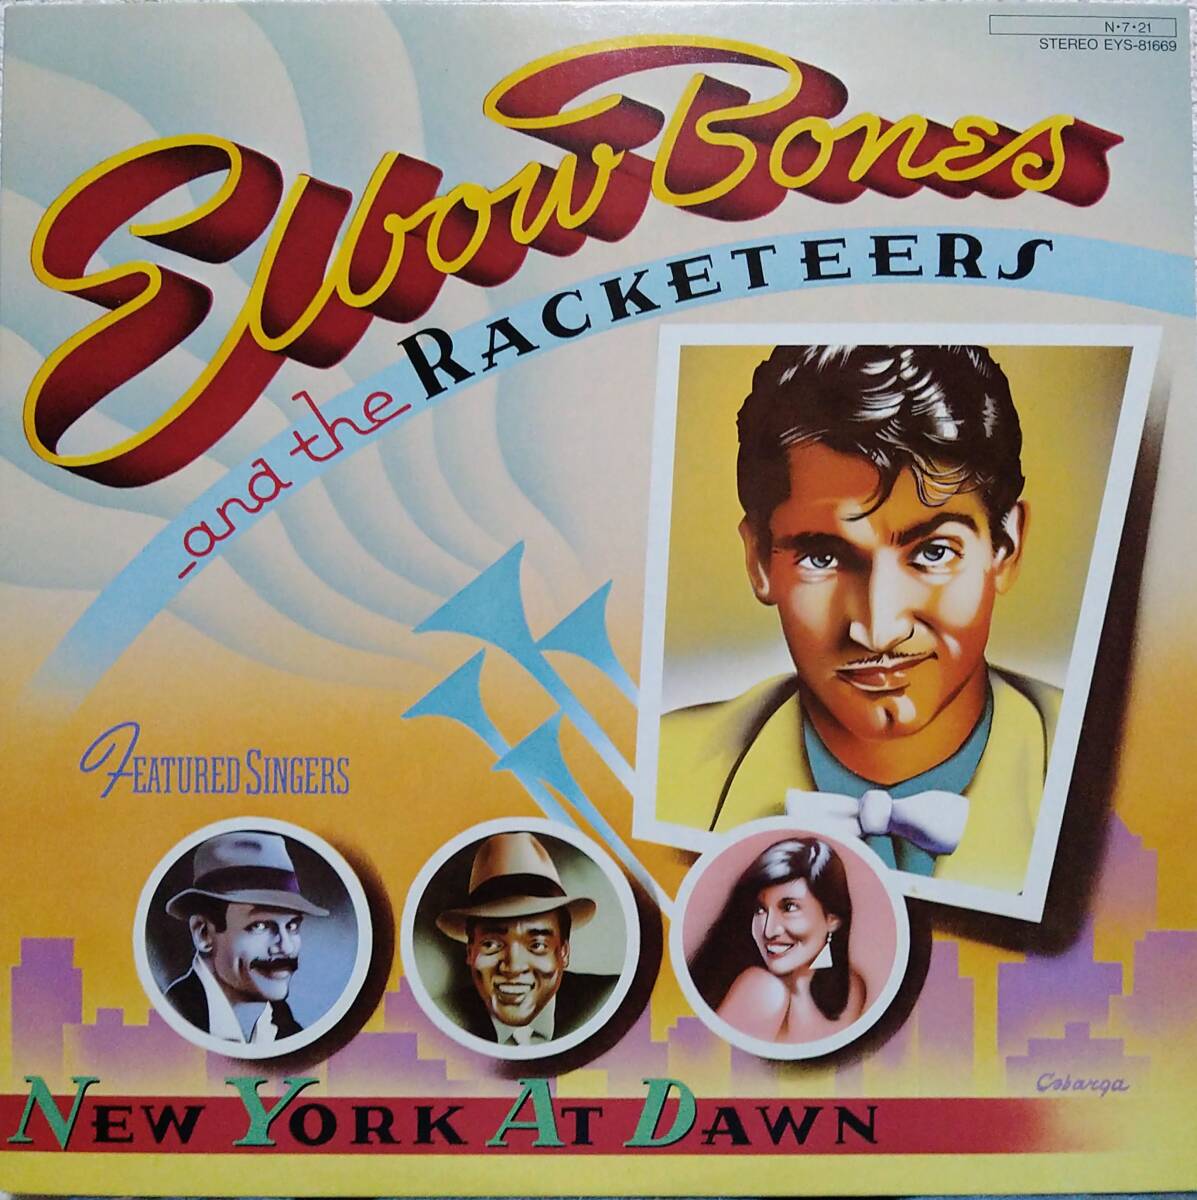 【LP Soul】Elbow Bones And The Racketeers「New York At Dawn」JPN盤 A Night In New York 収録！_ジャケット